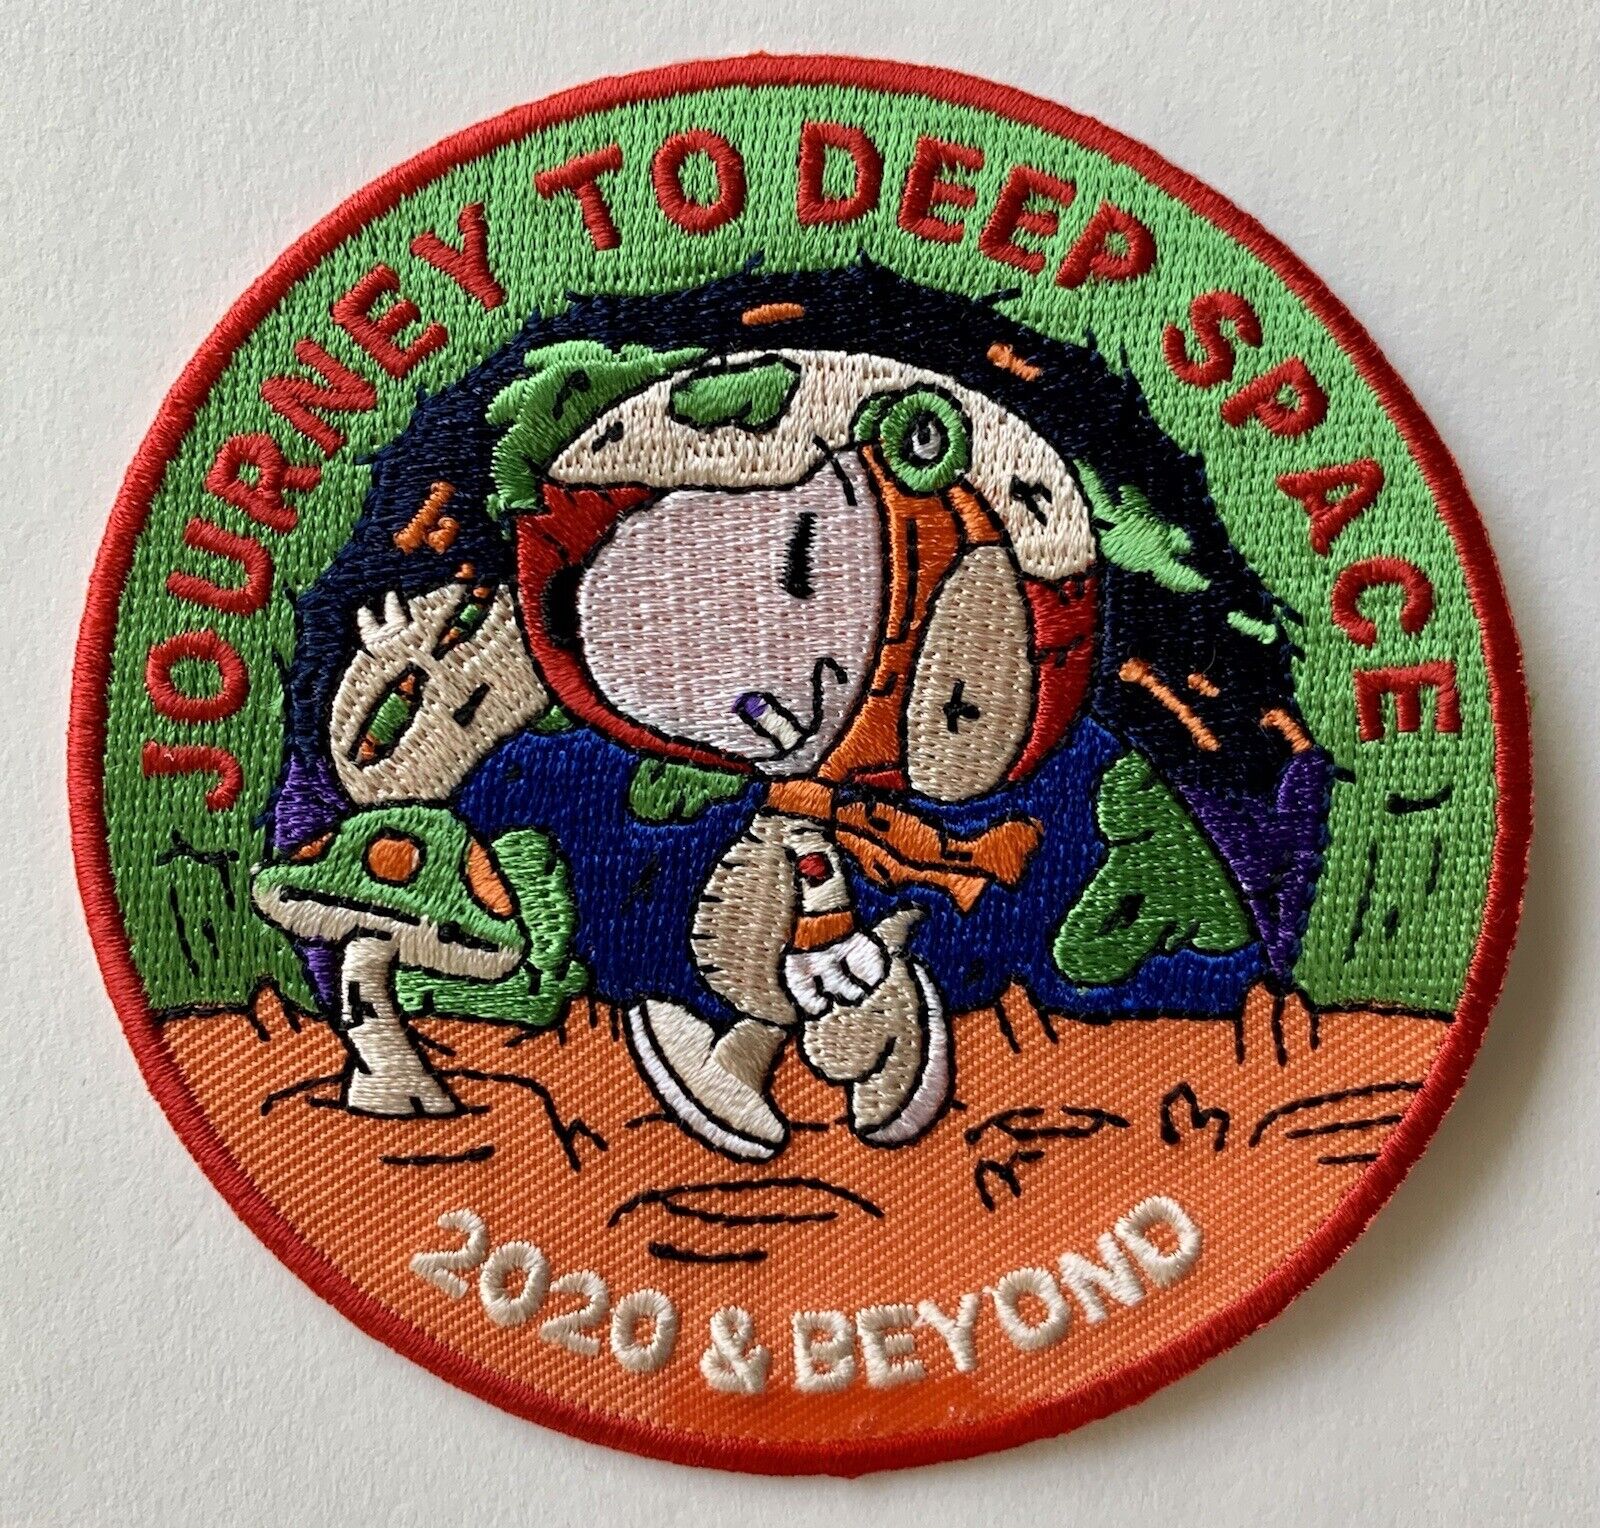 Original Psychedelic Snoopy Research Crew Mission To the Moon 2024 Patch